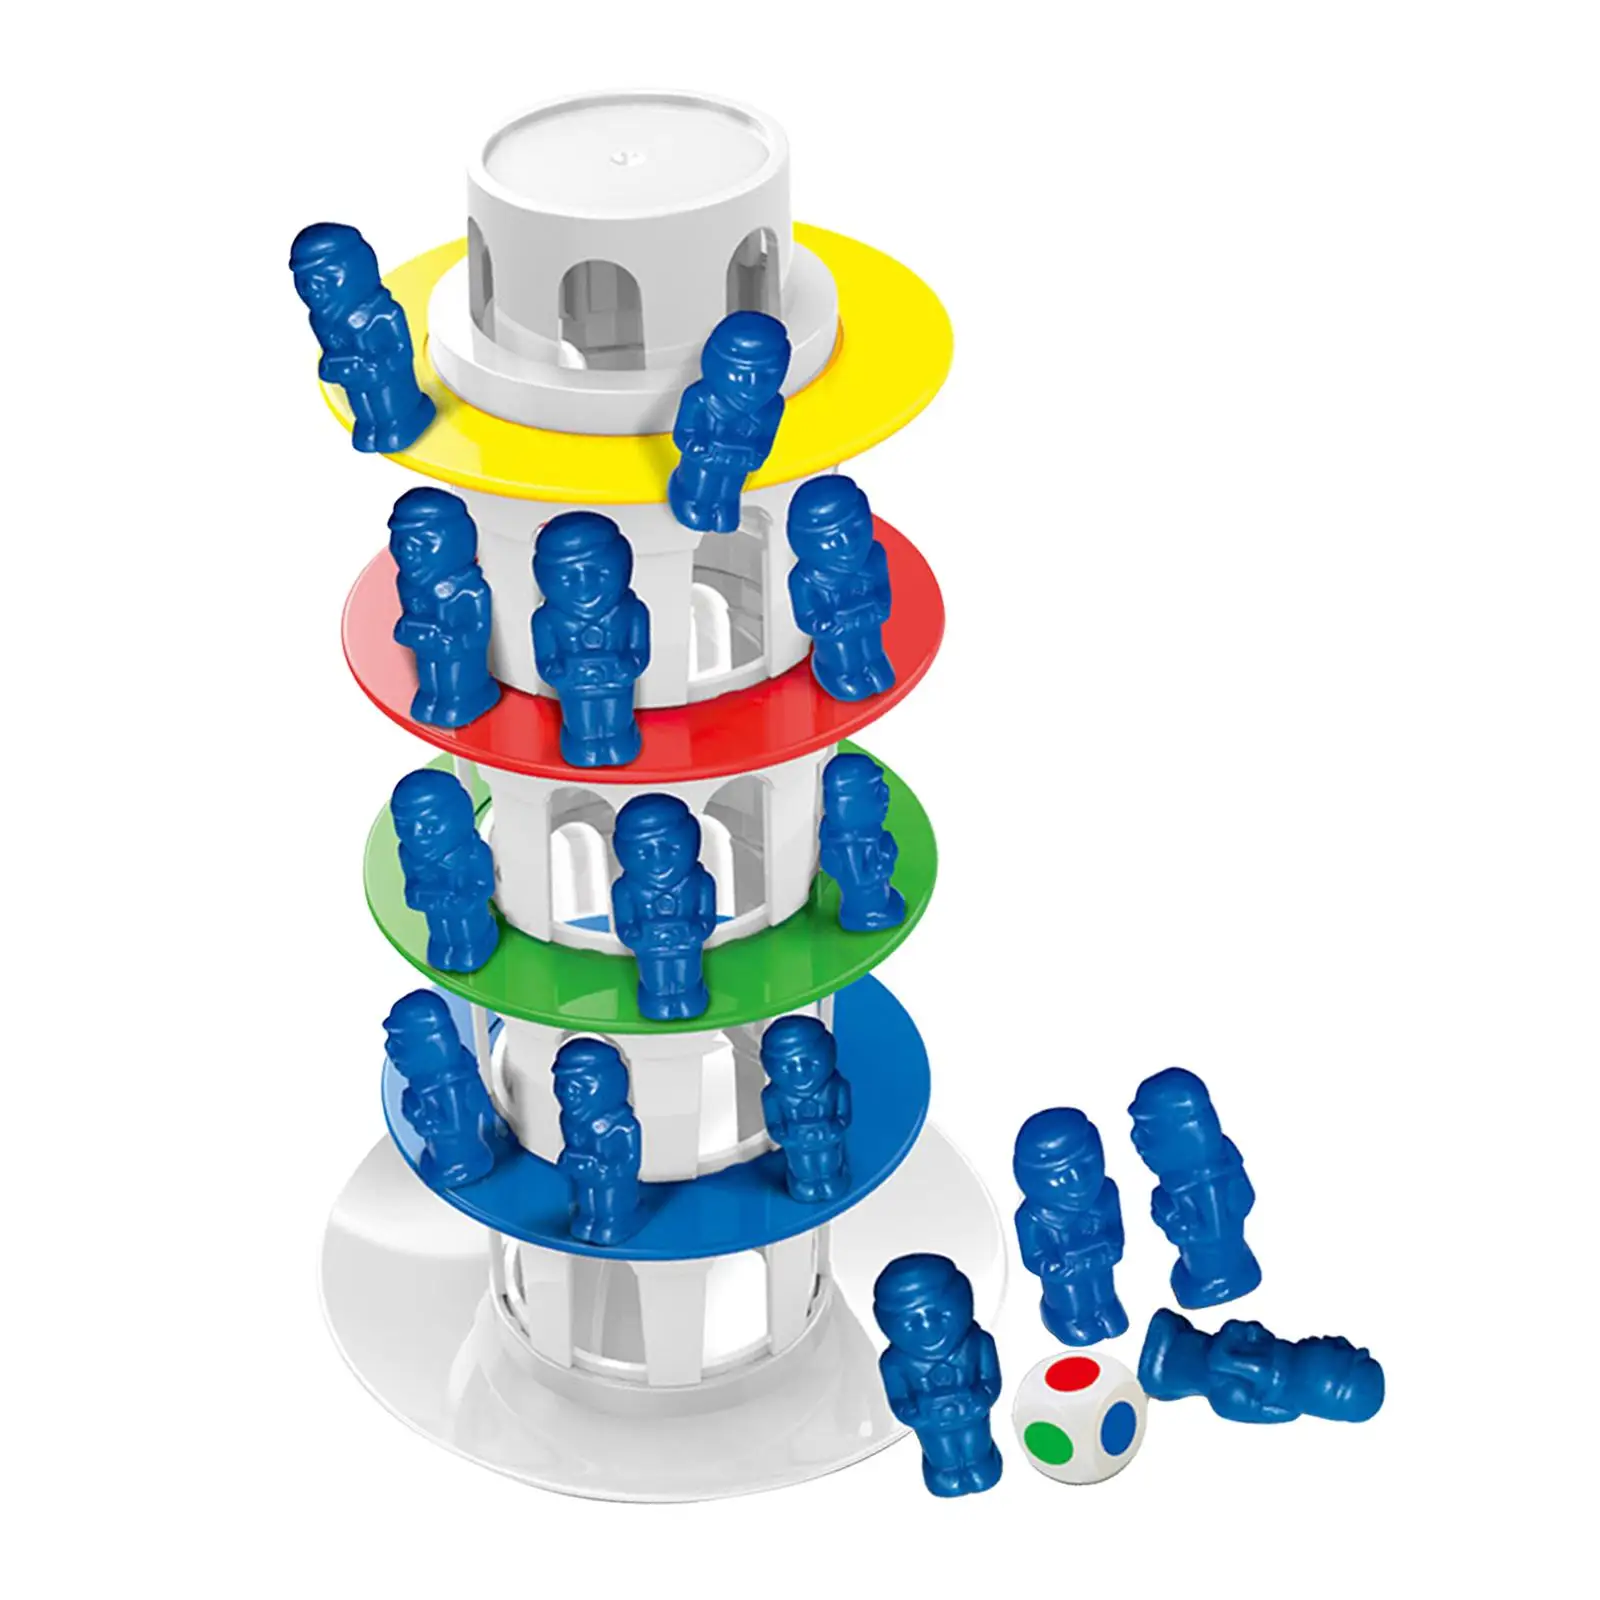 Toppling Leaning Tower Toy Family Games Fine Motor Skill for Kids